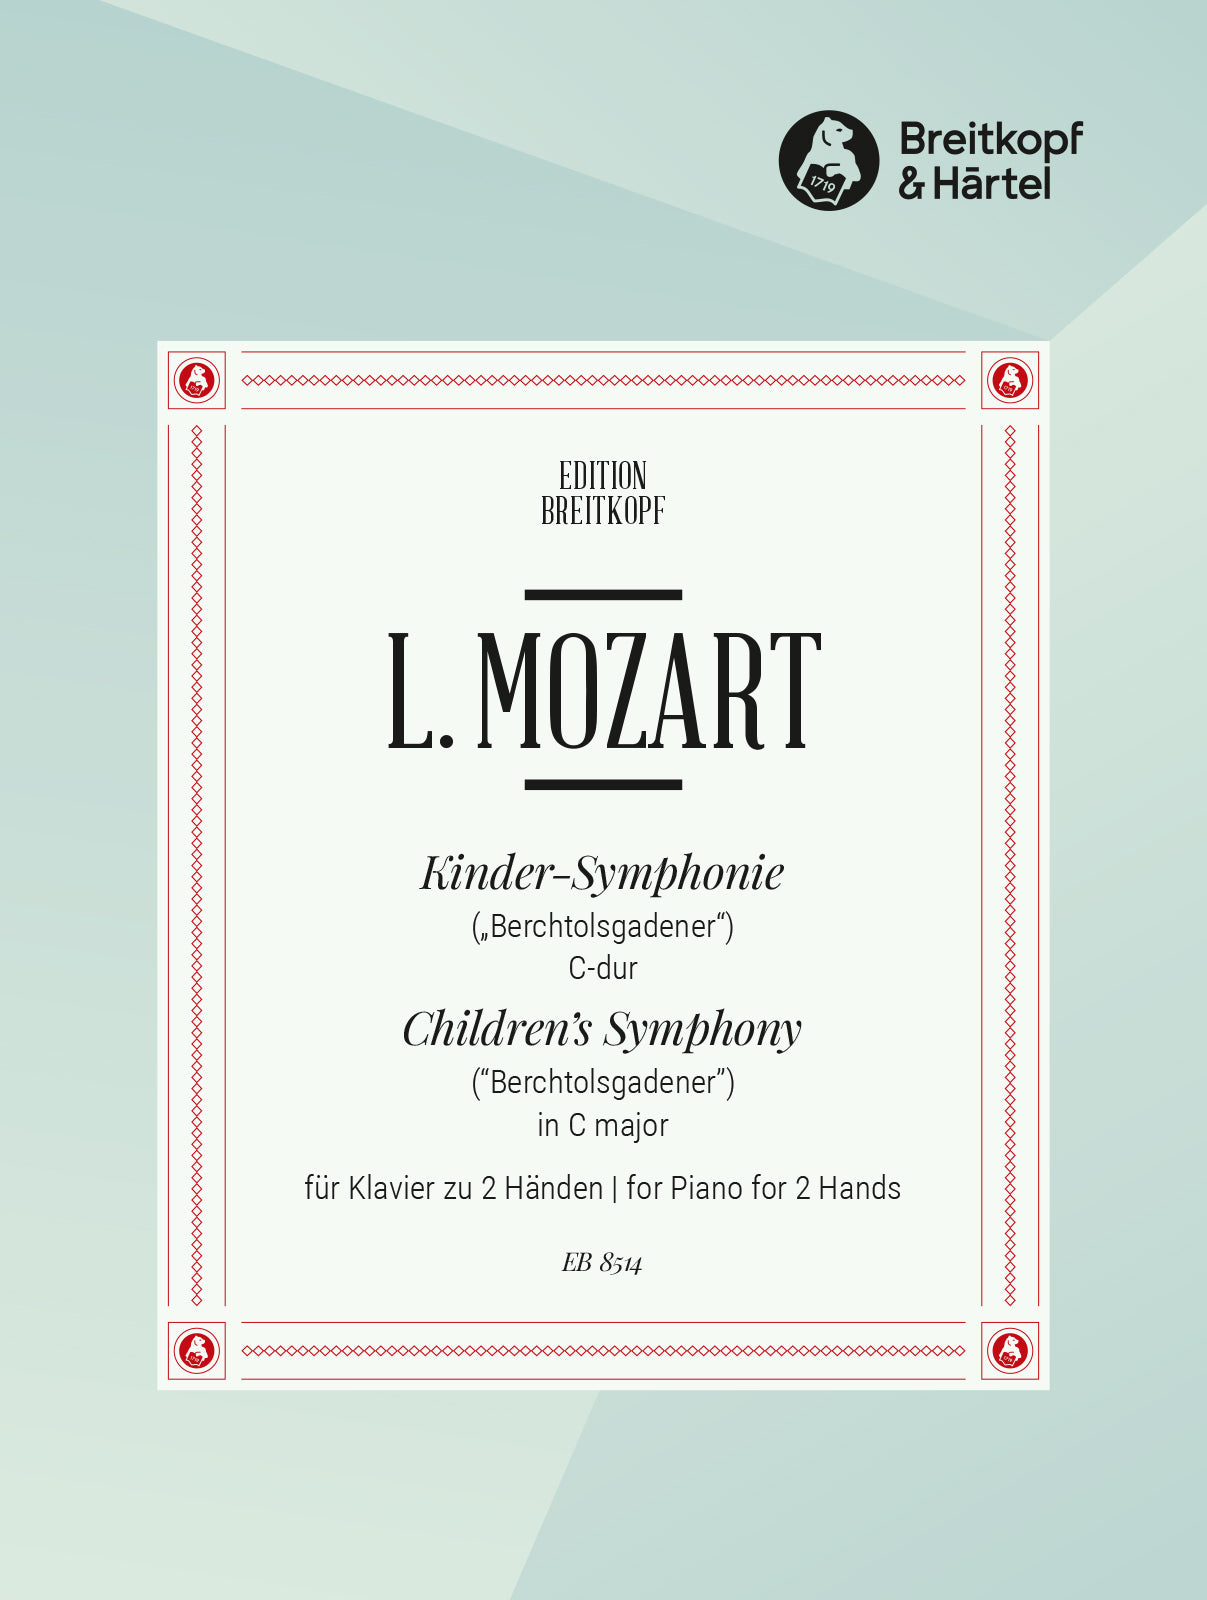 Mozart: Children's Symphony in C Major (arr. for piano)